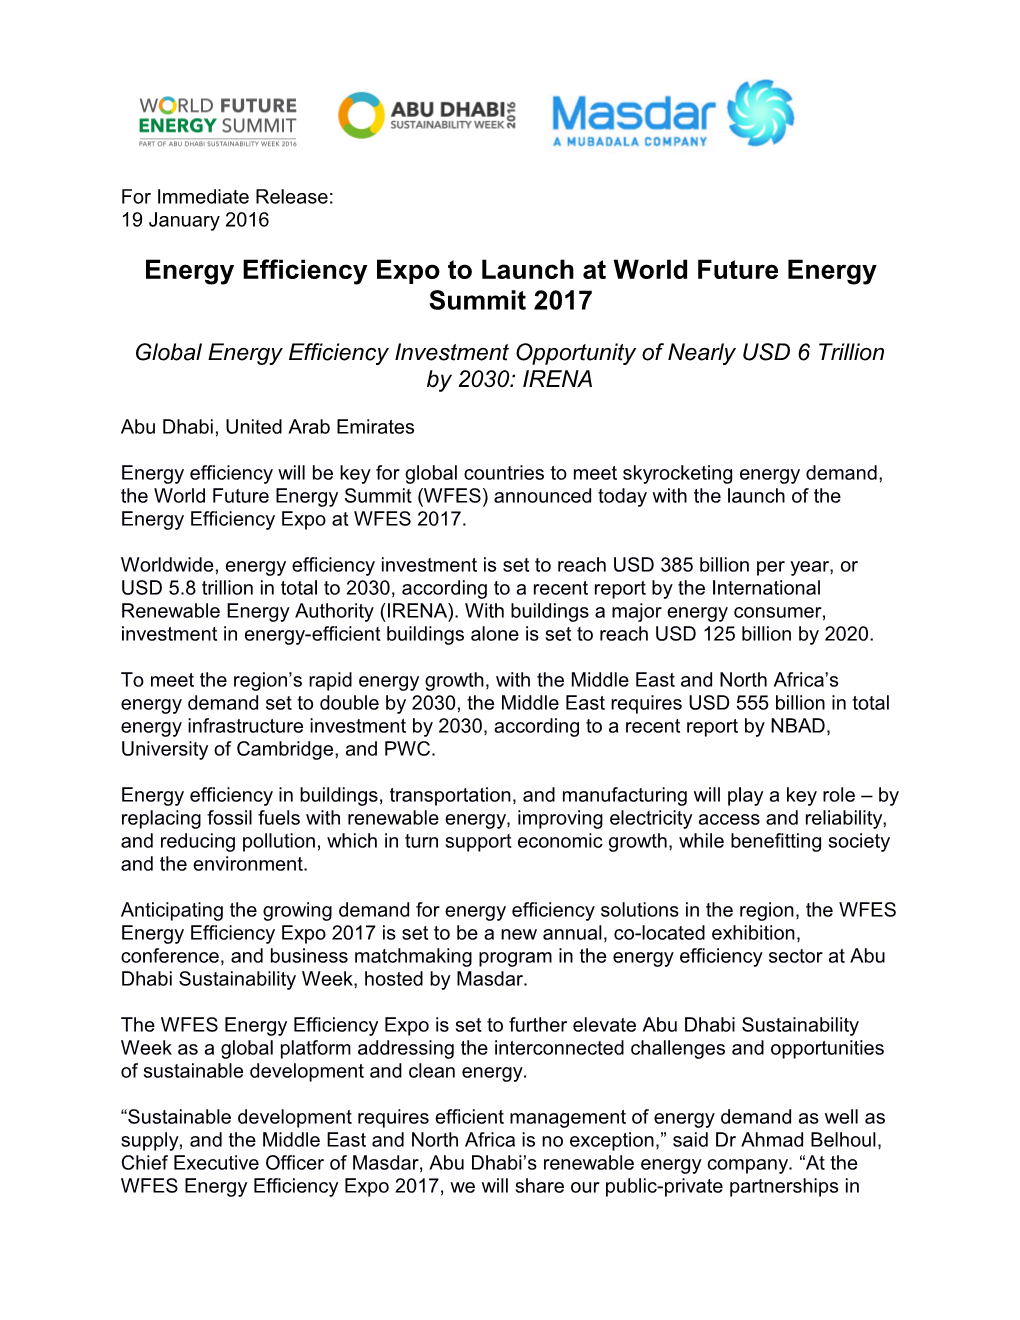 Energy Efficiency Expo to Launch at World Future Energy Summit 2017